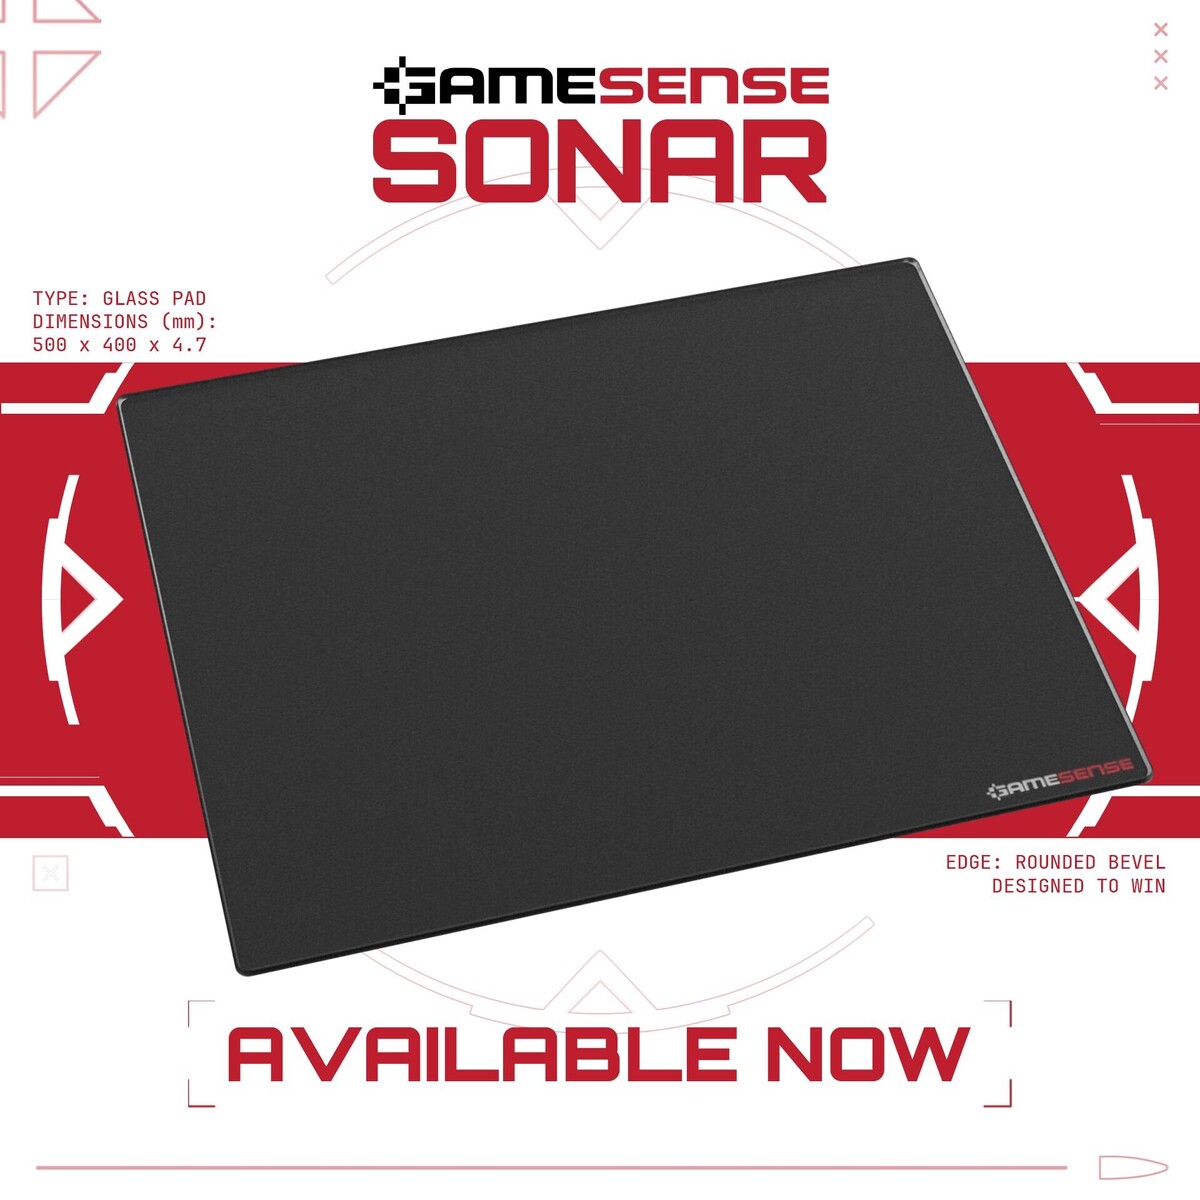 Gamesense Sonar Glass Mouse Pad Available Now | TechPowerUp